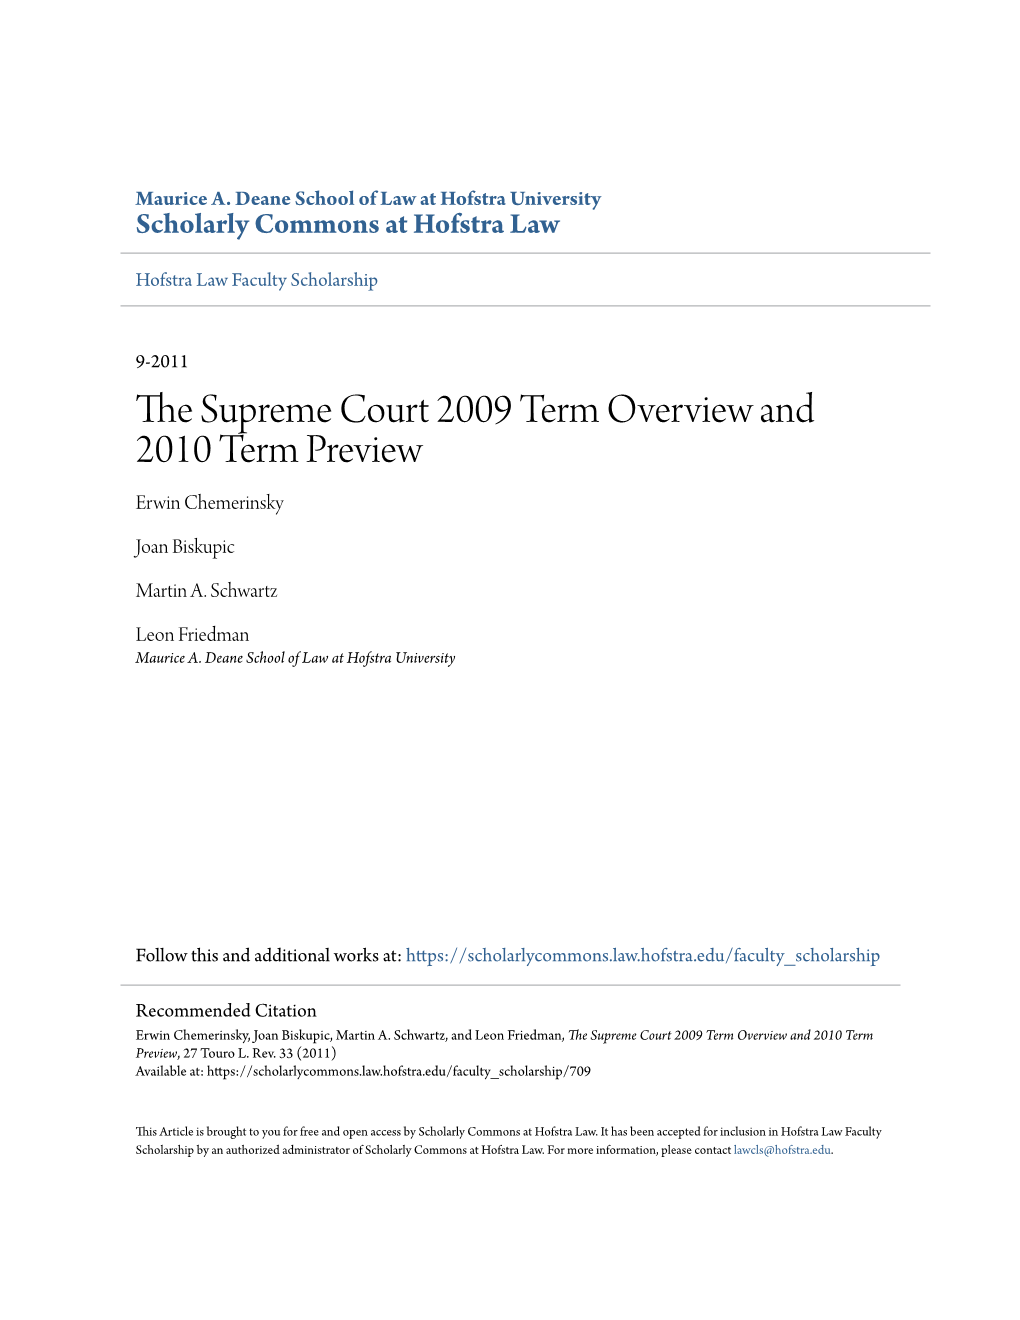 The Supreme Court 2009 Term Overview and 2010 Term Preview, 27 Touro L